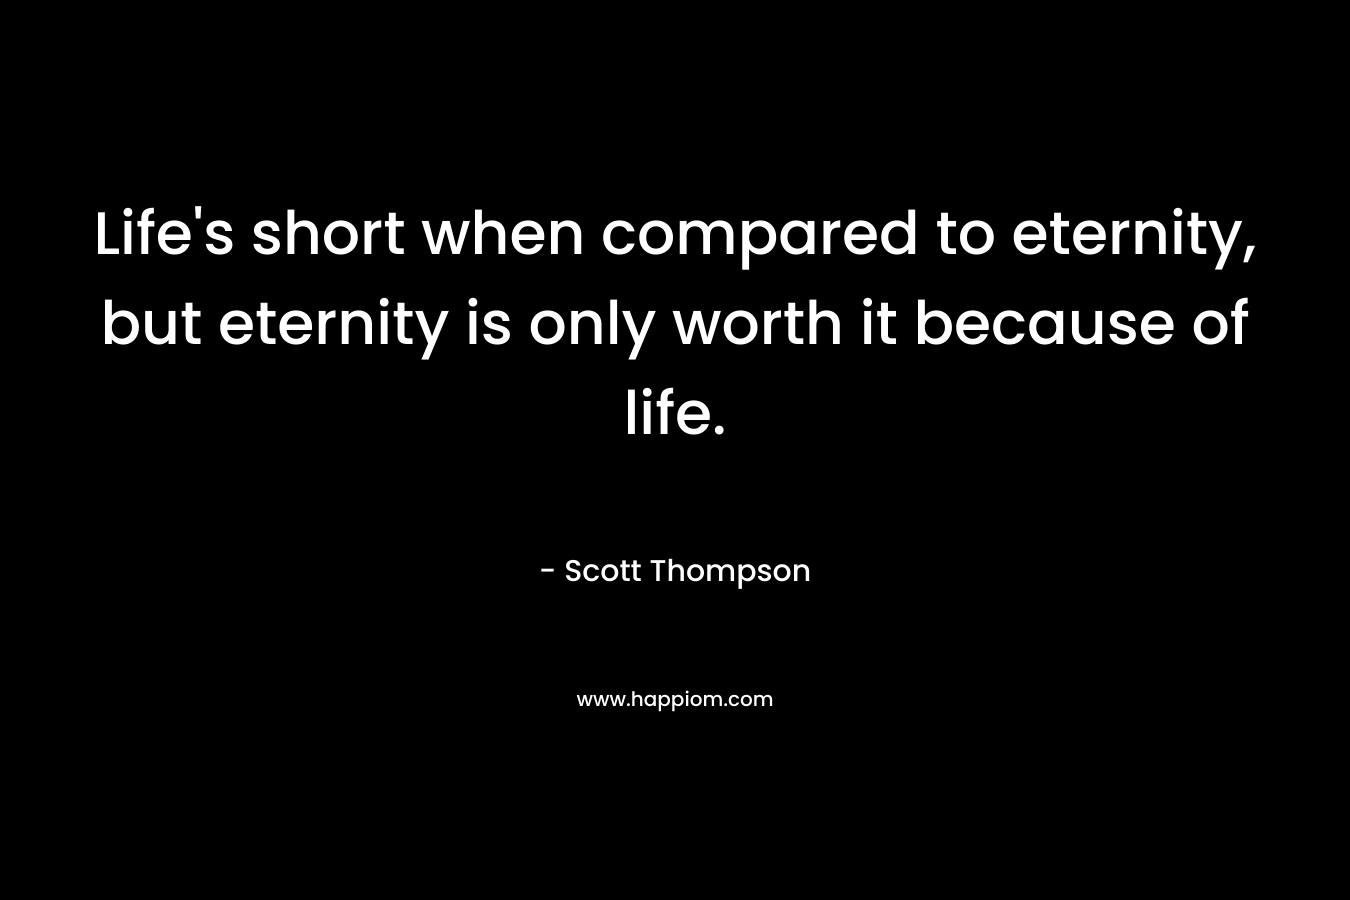 Life's short when compared to eternity, but eternity is only worth it because of life.